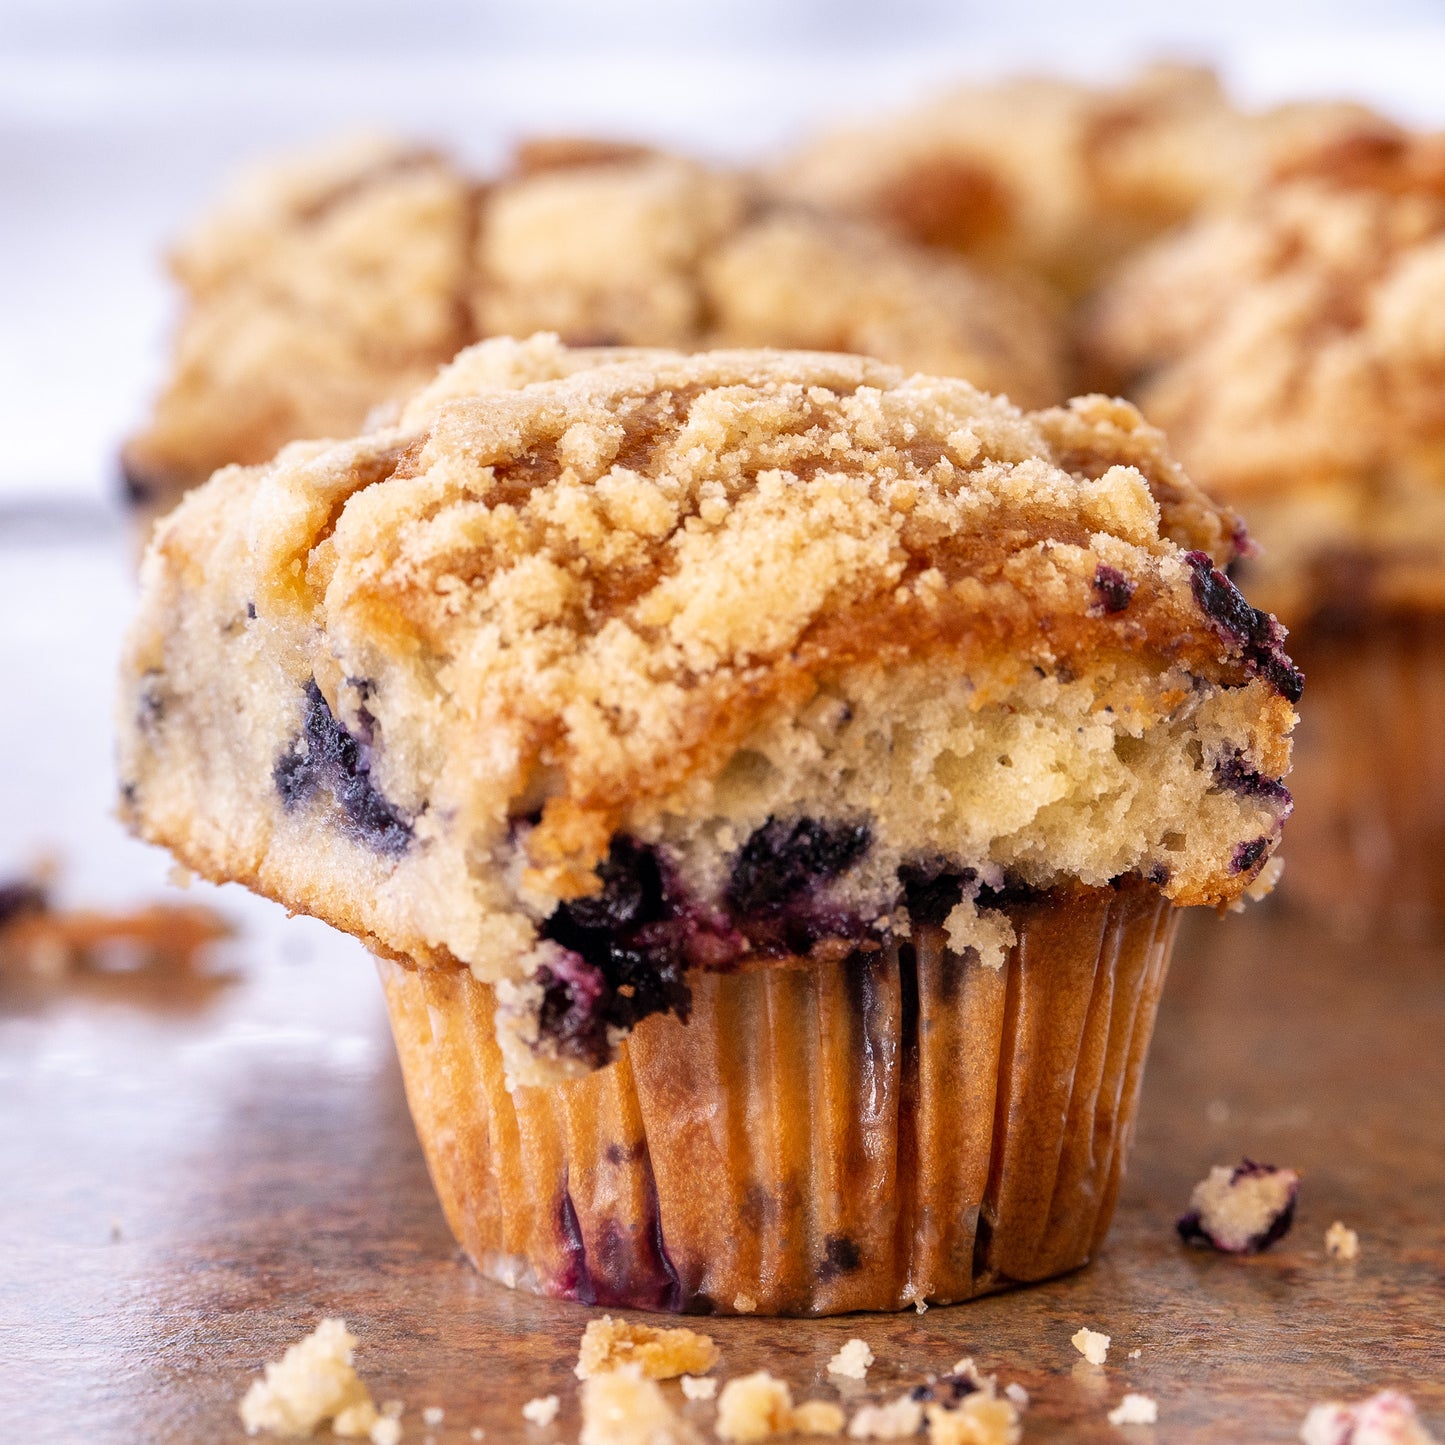 Blueberry Muffin 4 pack